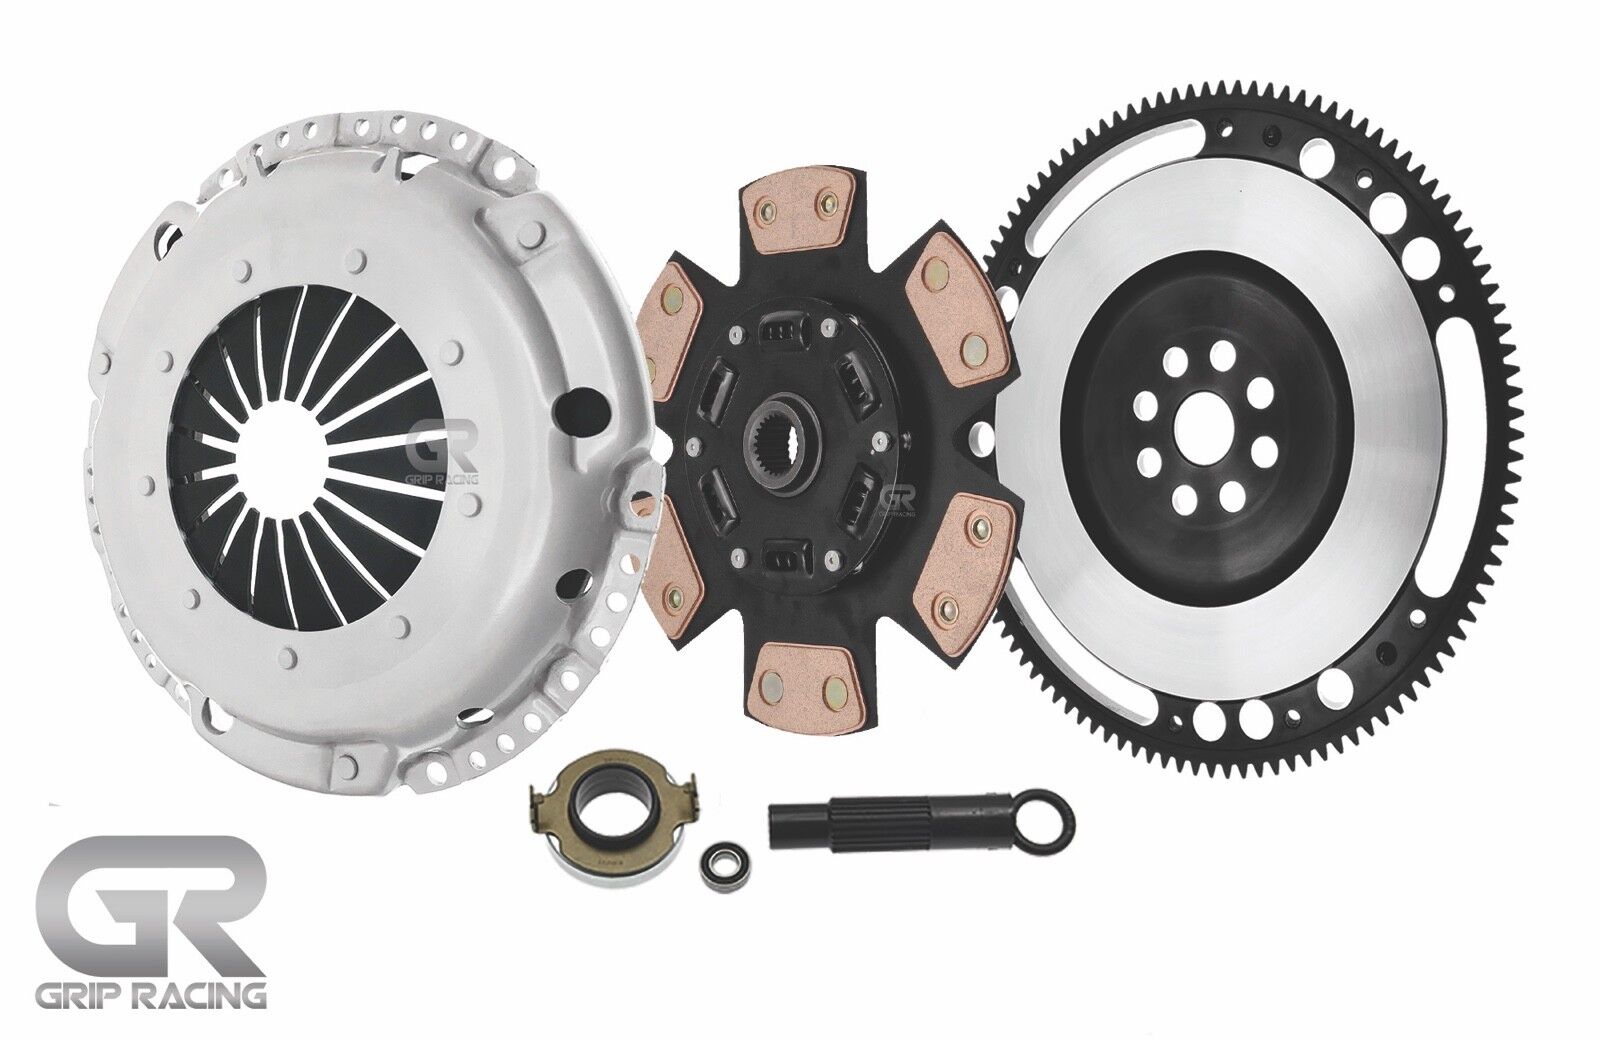 STAGE 3 CLUTCH KIT+FORGED CHROMOLY FLYWHEEL FITS NISSAN SILVIA S13 S14 SR20DET